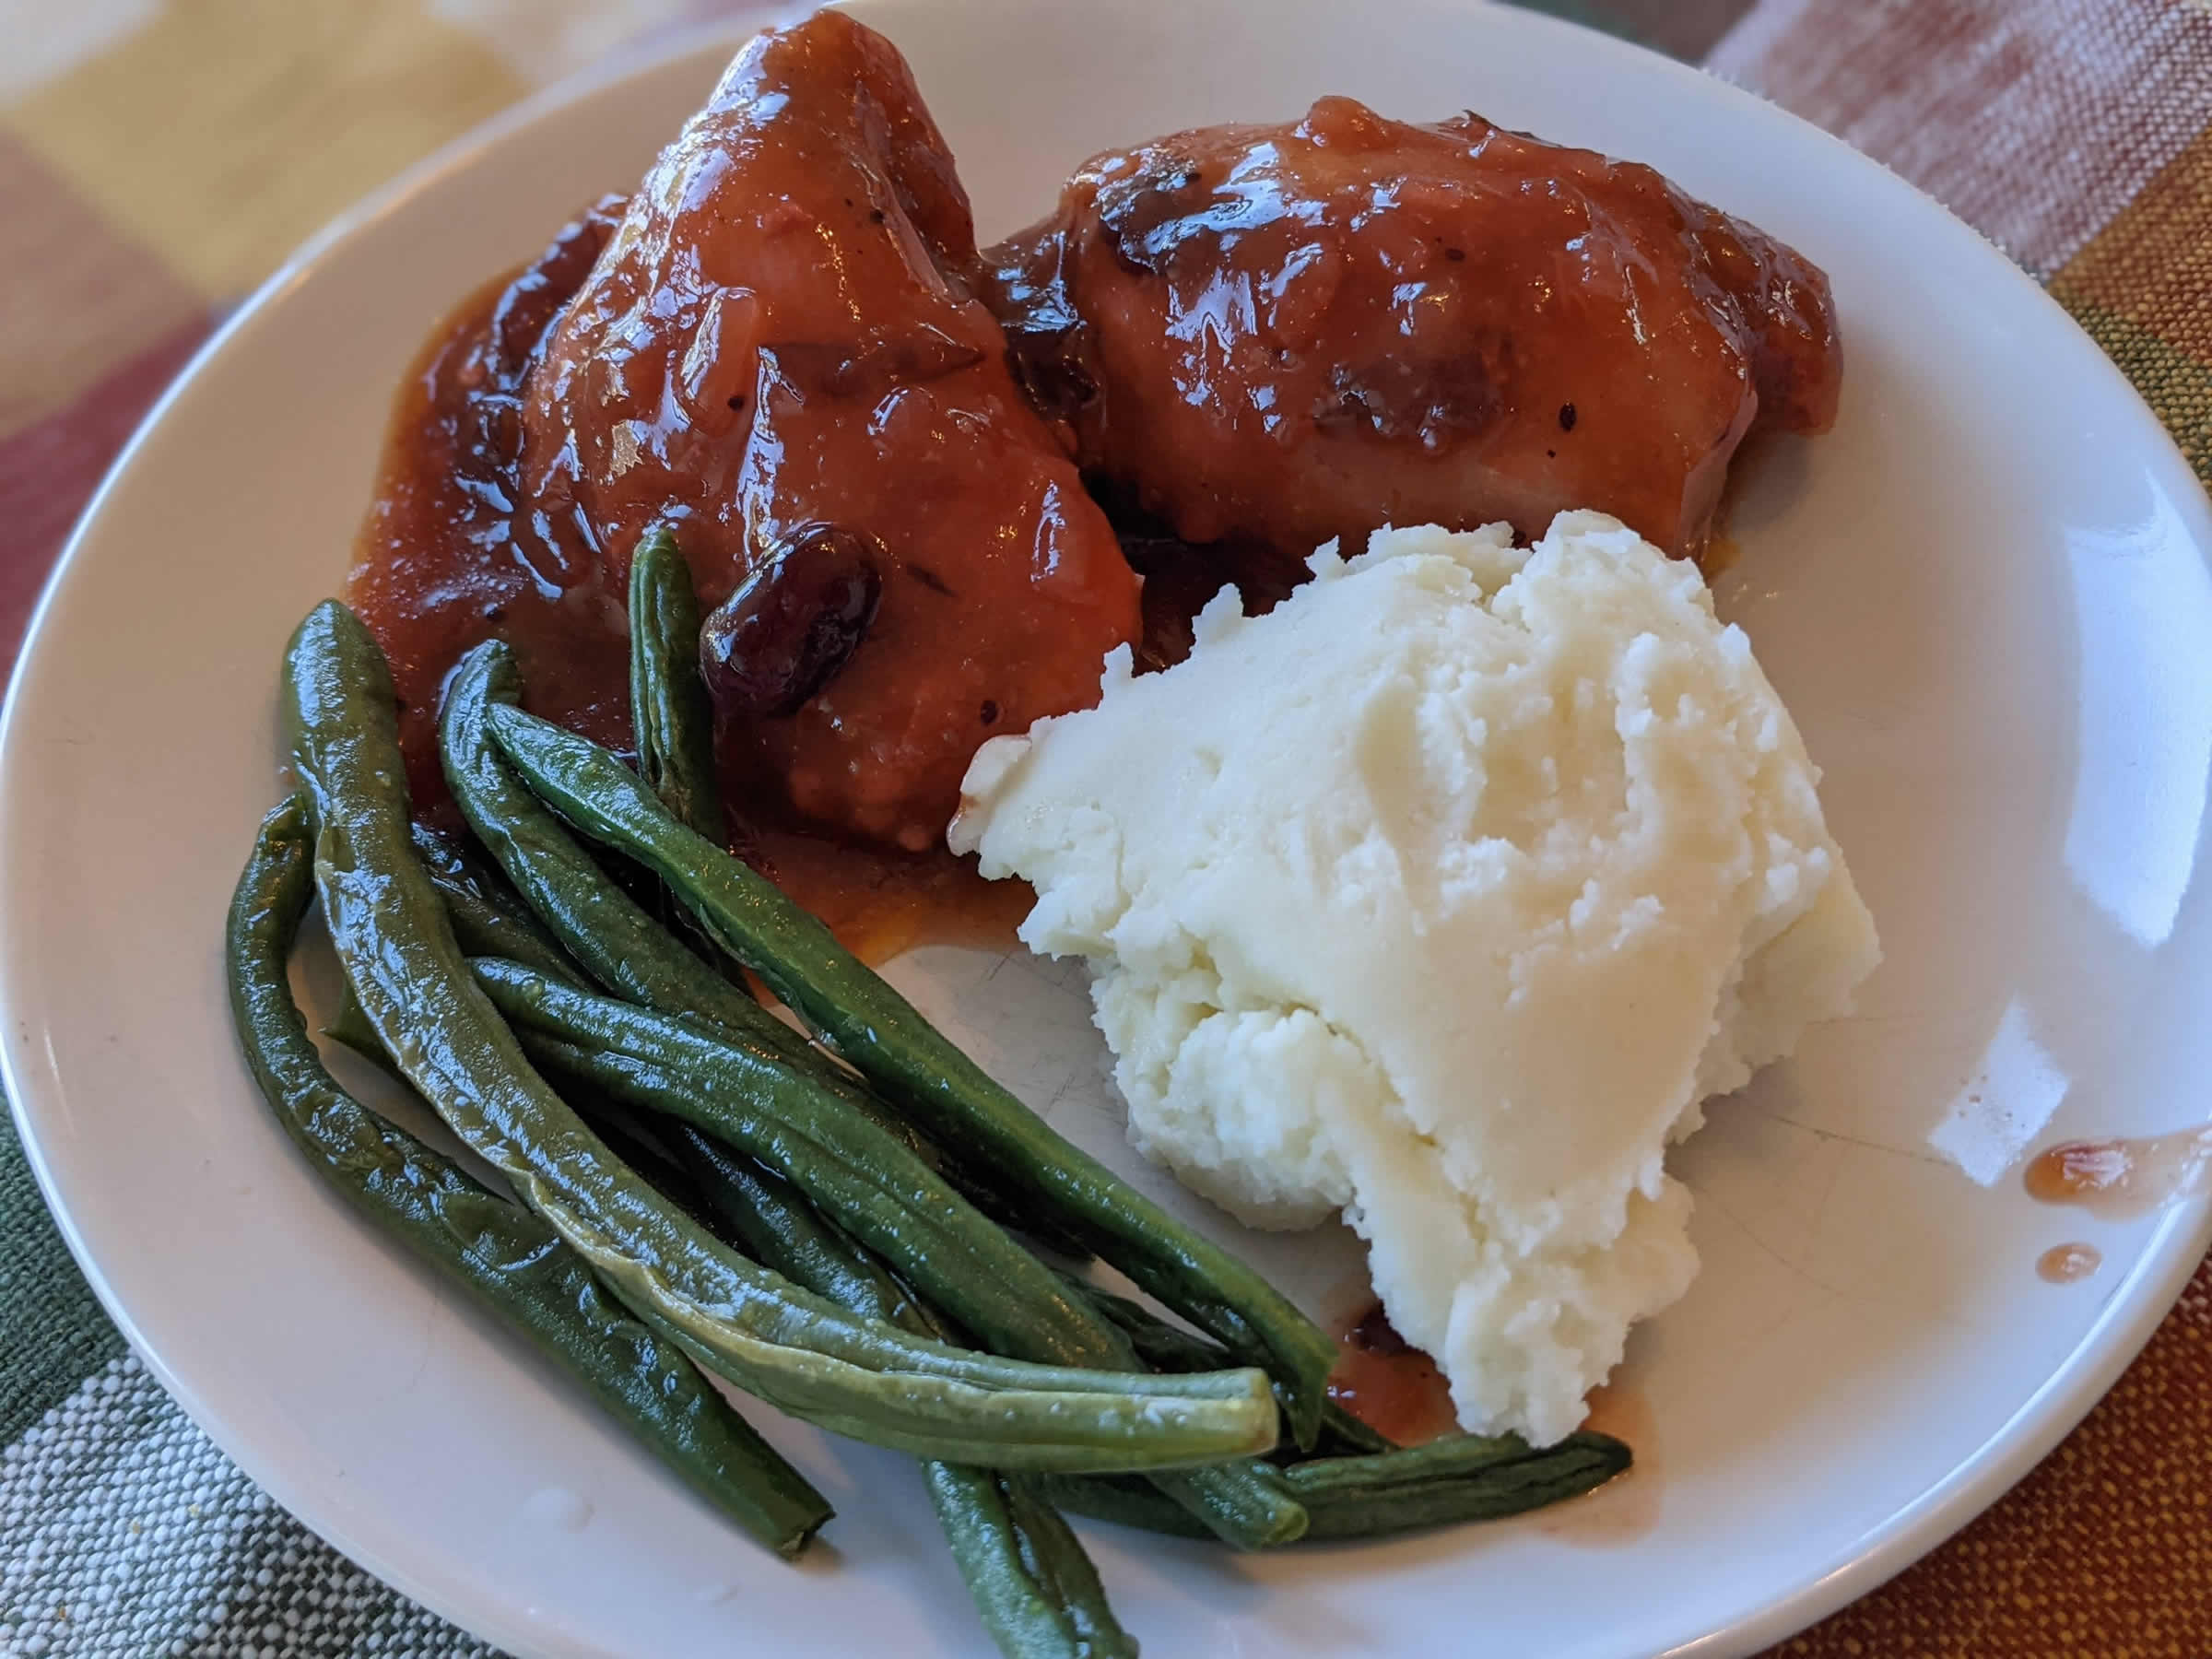 Ginger's Chicken served with mashed potatoes and roast green beans